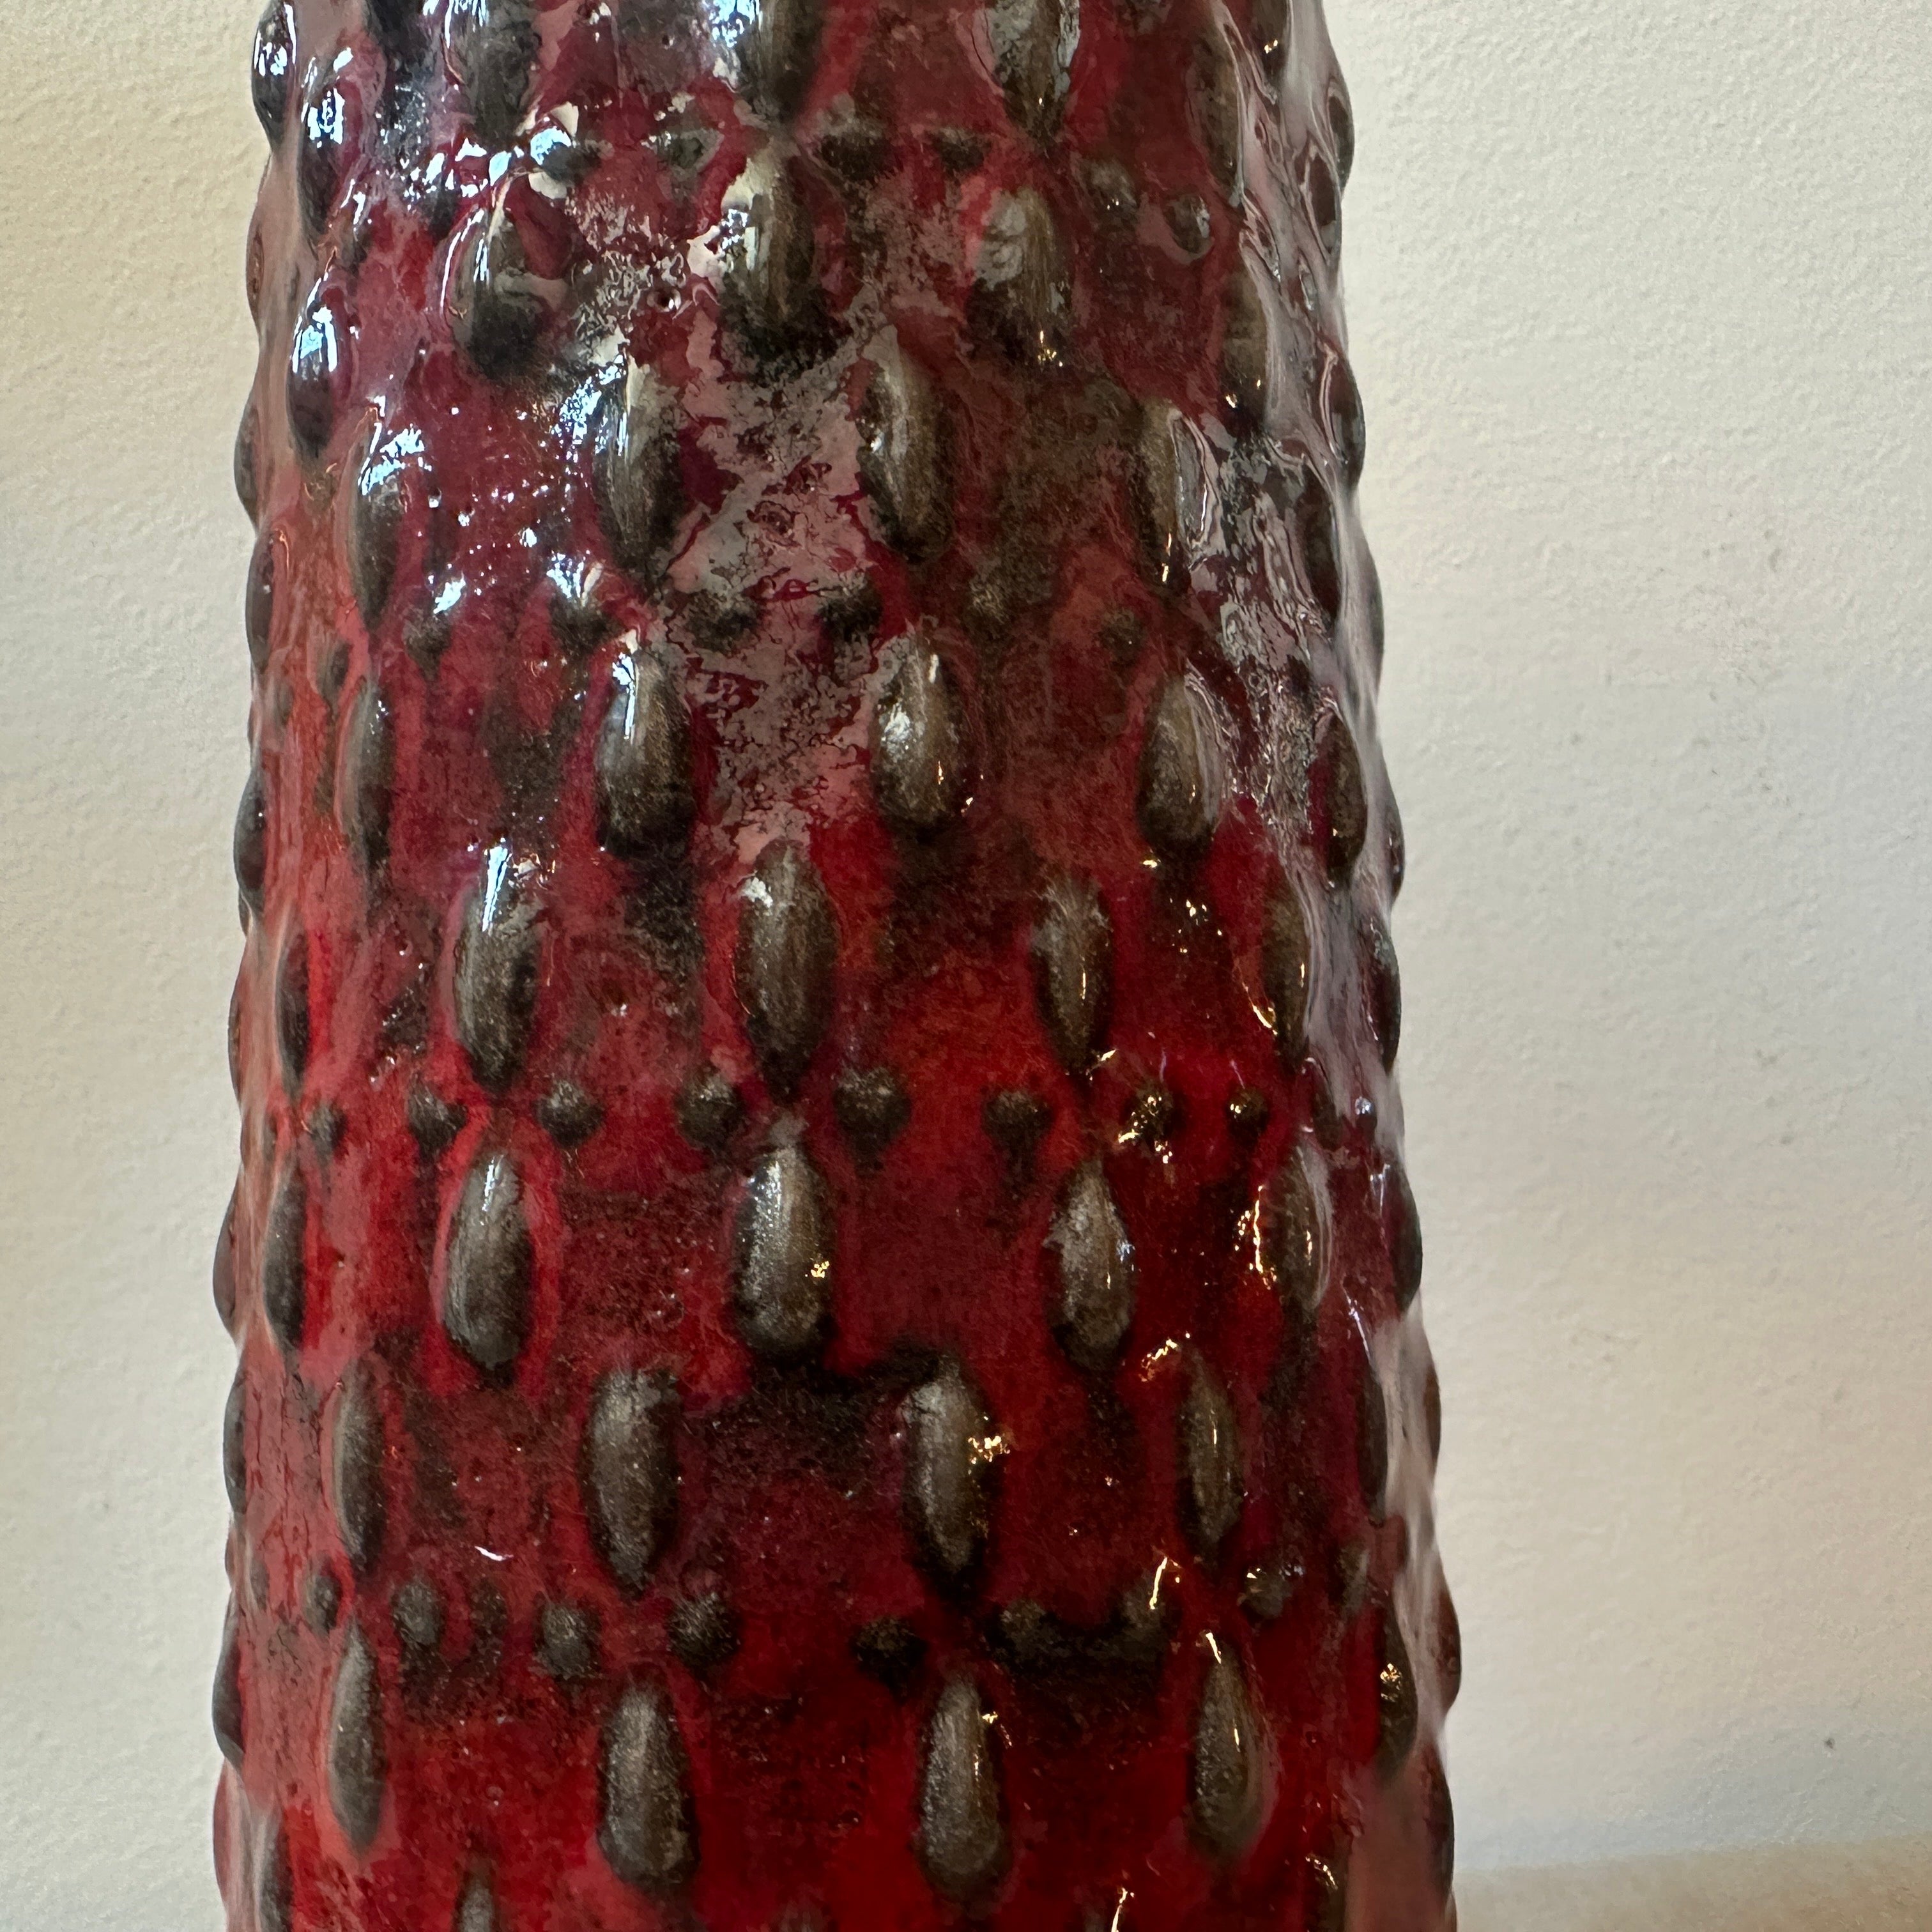 A fat lava ceramic vase manufactured in germany in the Seventies by WGP, it's in lovely conditions. The vase is a striking and unique piece of art and design, it embodies the bold and dynamic aesthetics of 1970s Modernist design, particularly the